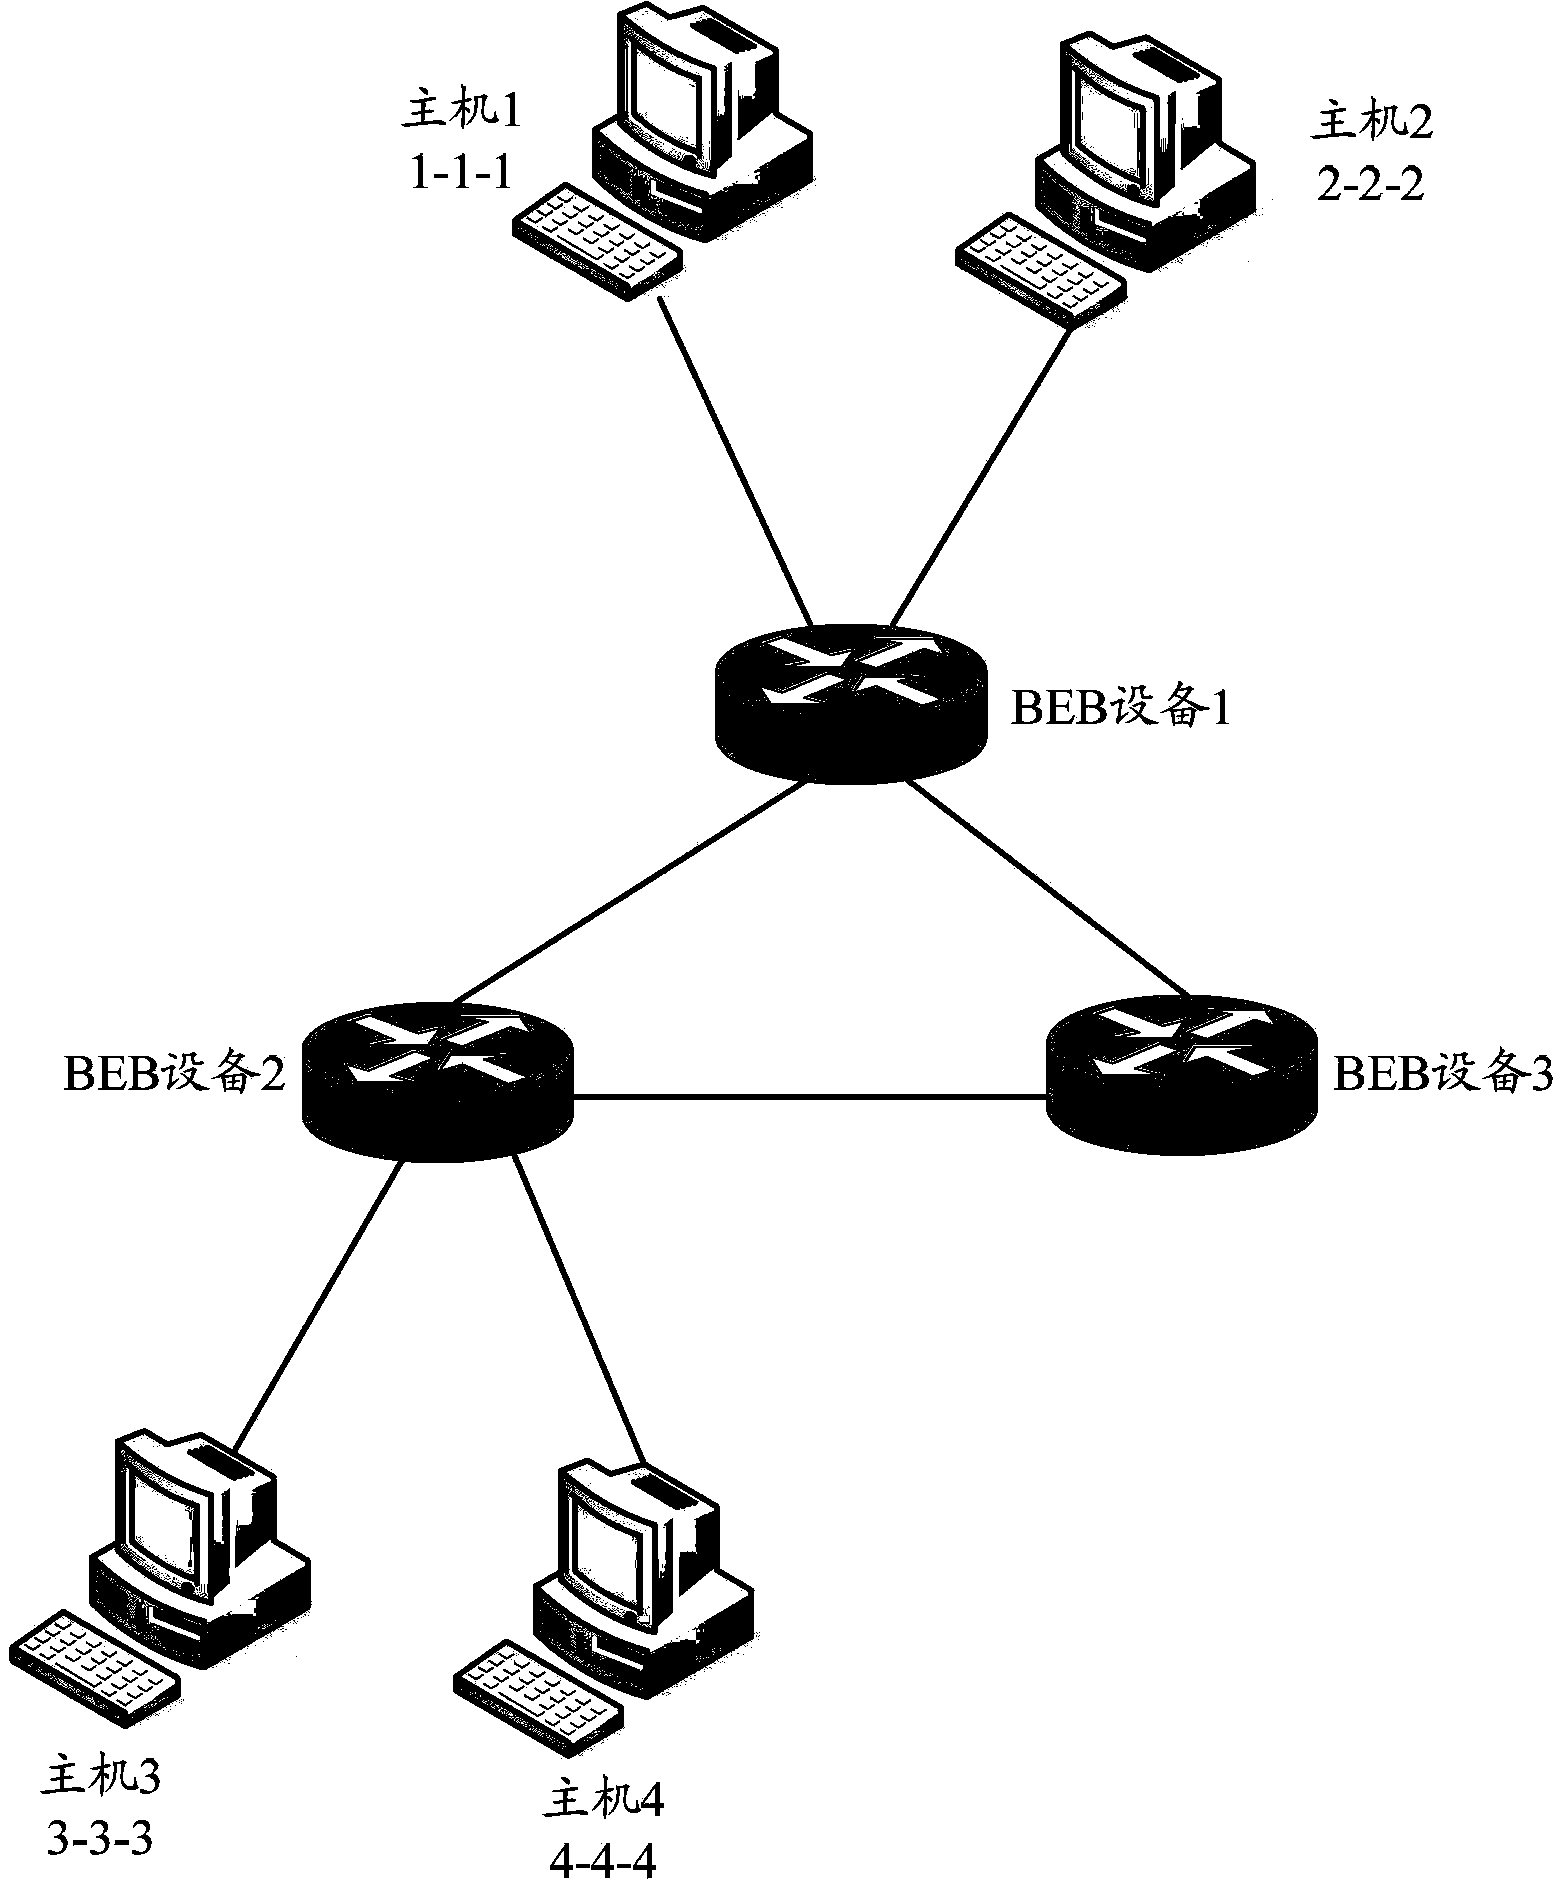 Method and equipment for sharing load in SPB (Shortest Path Bridging) network